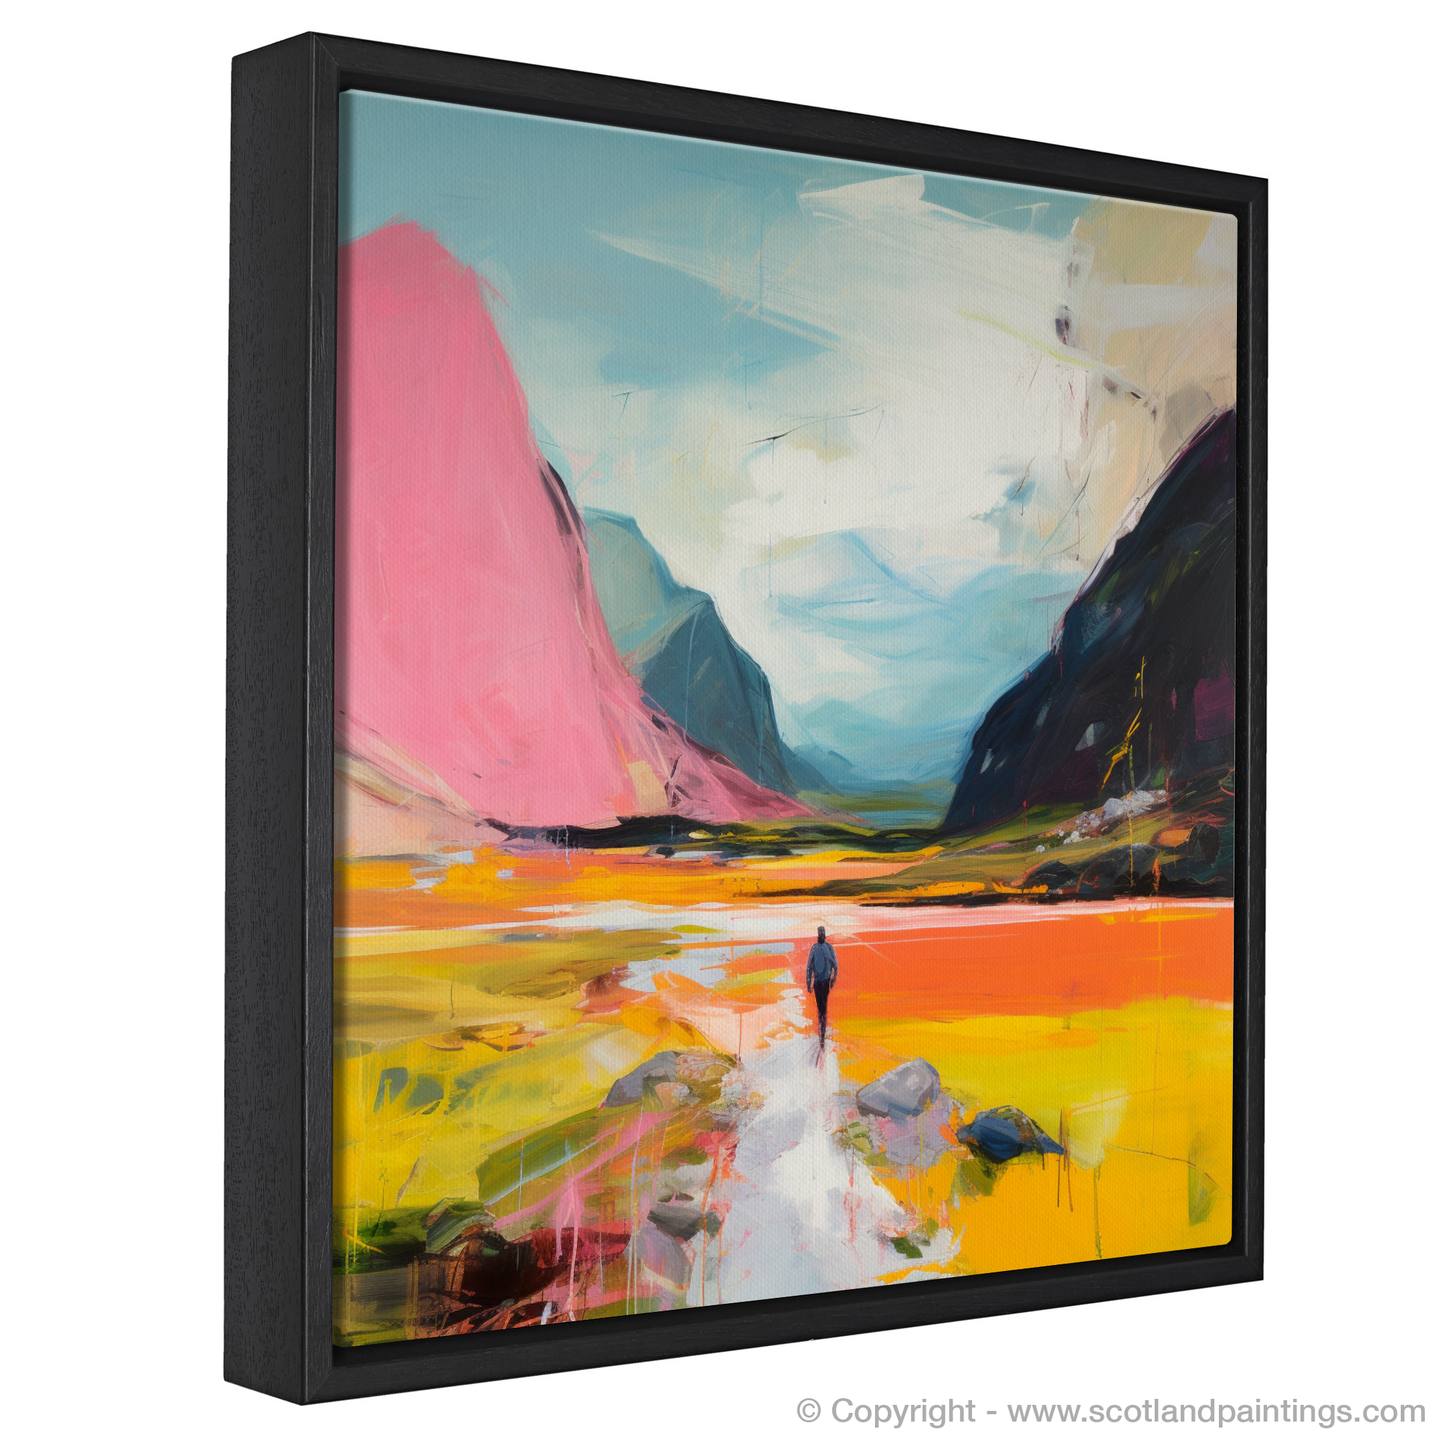 Painting and Art Print of Lone hiker in Glencoe during summer entitled "Lone Hiker's Summer Solitude in Glencoe".